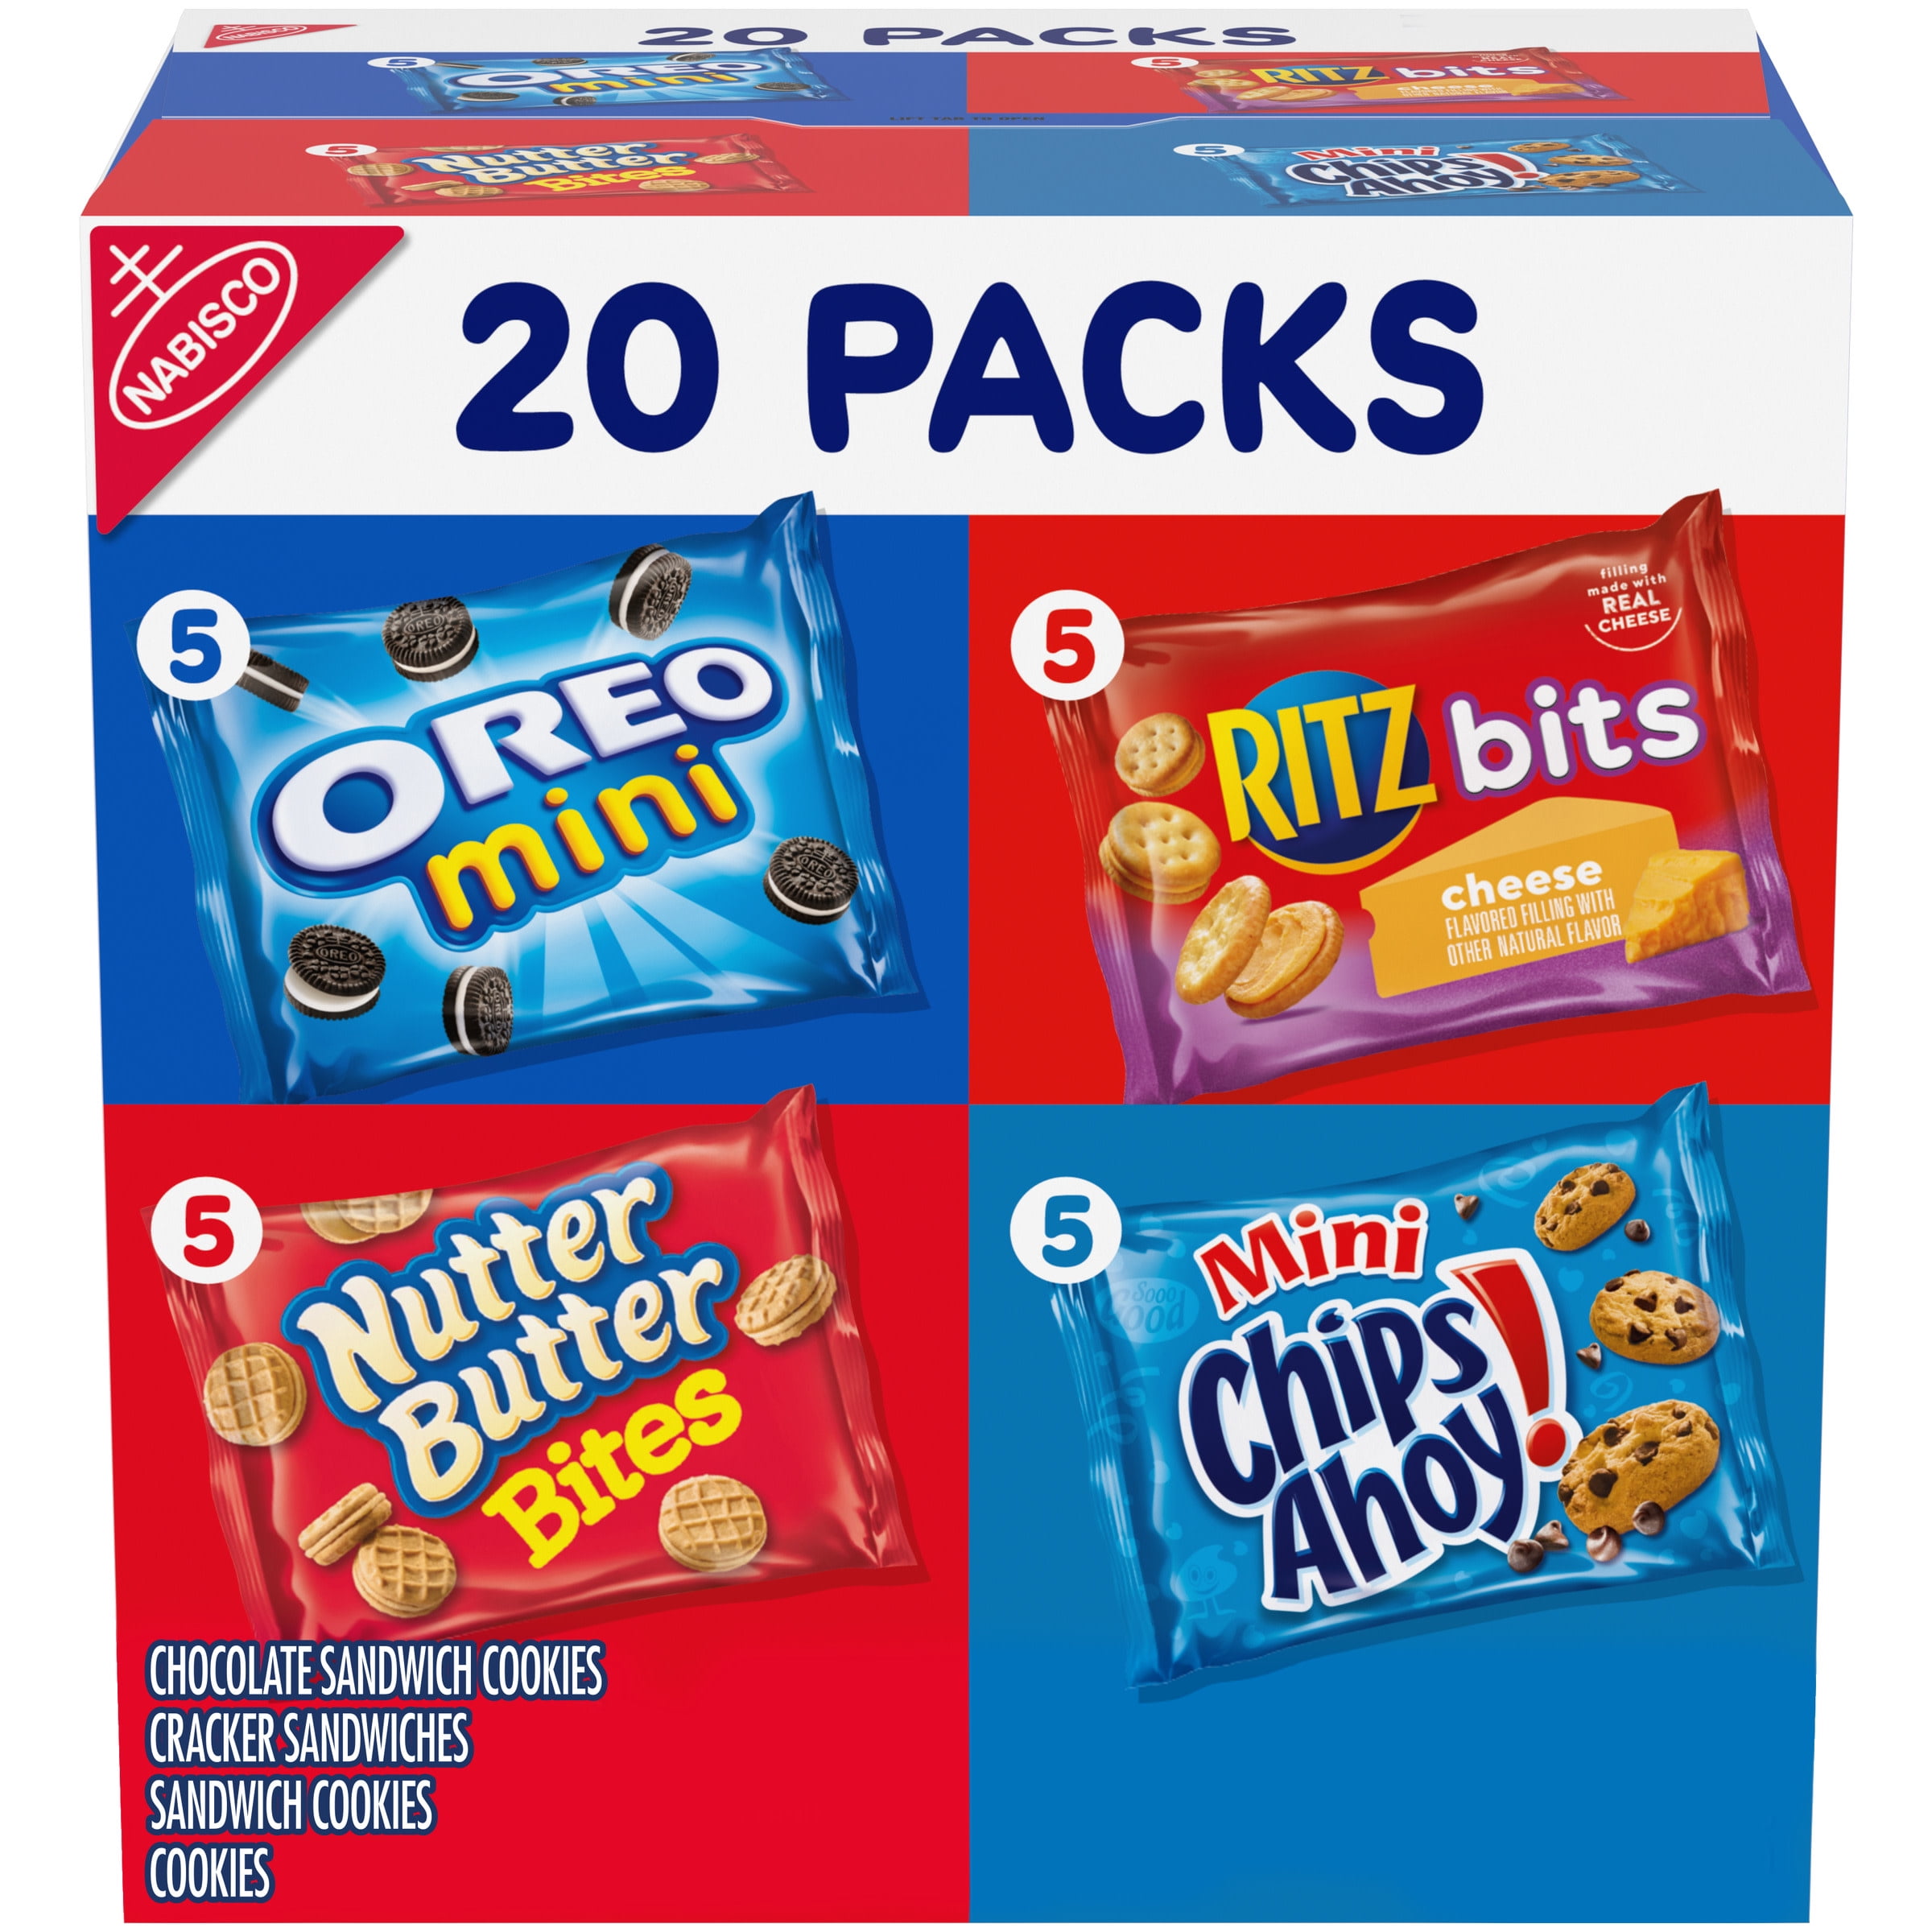 Ultimate 40 select snack machine